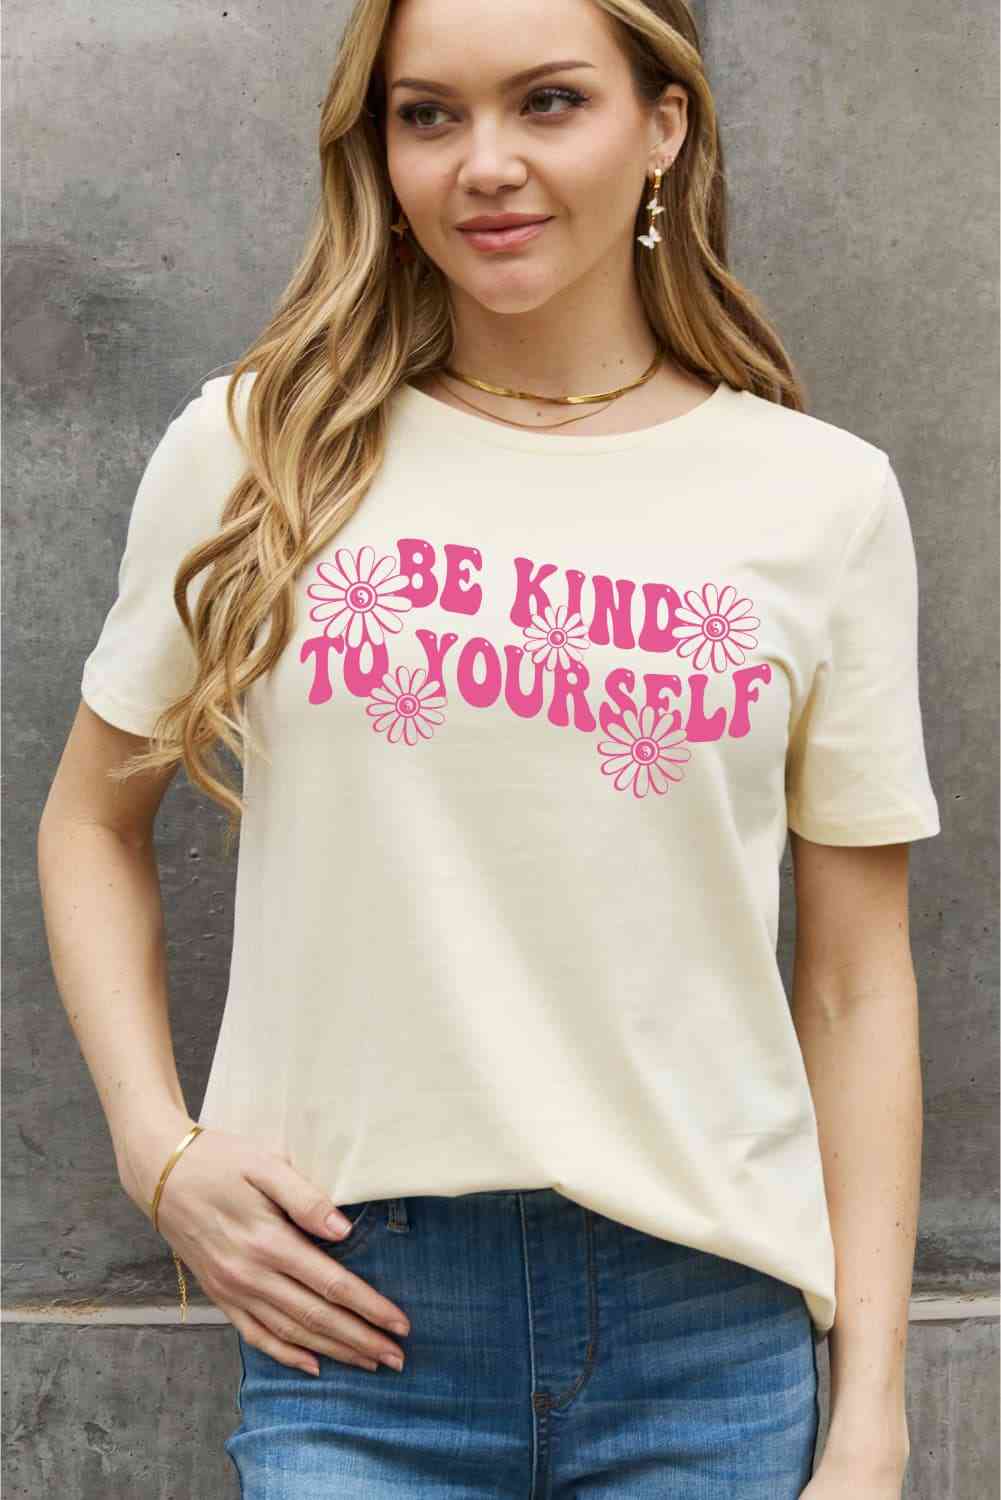 Simply Love Full Size BE KIND TO YOURSELF Flower Graphic Cotton Tee - Shop Tophatter Deals, Electronics, Fashion, Jewelry, Health, Beauty, Home Decor, Free Shipping